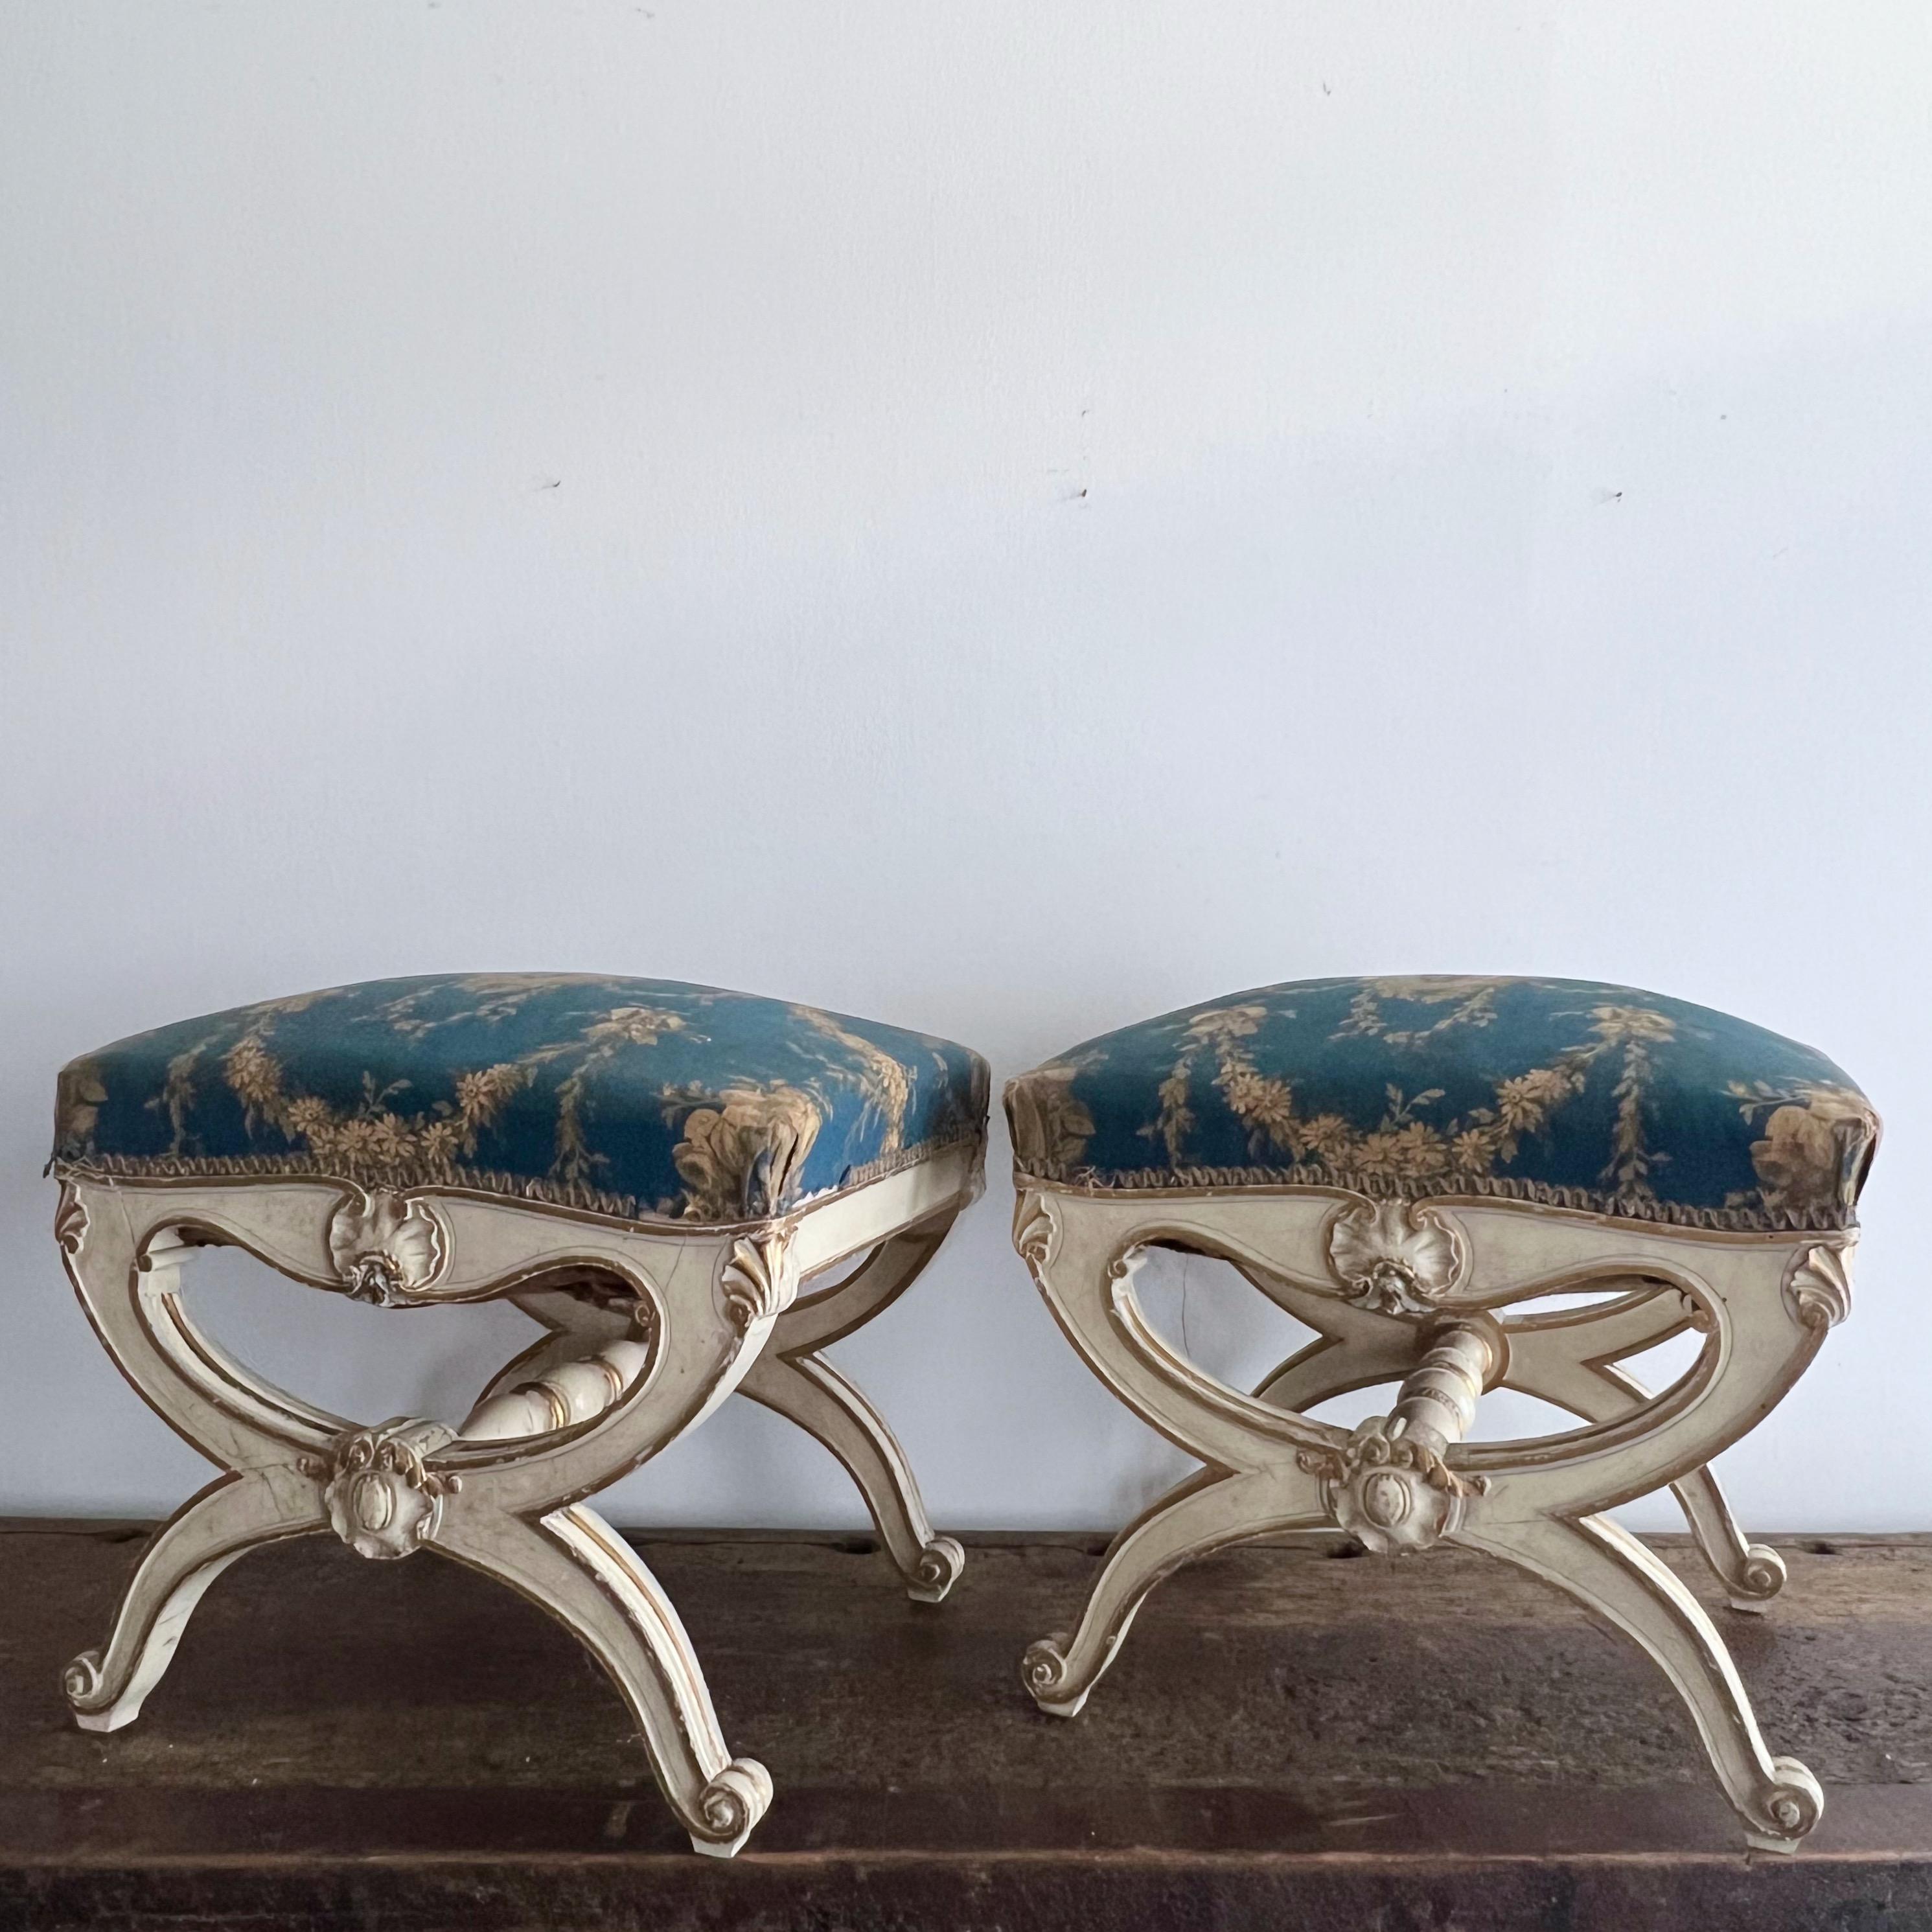 Hand-Carved Pair of 19th century Italian Polychrome and Parcel-Gilt Curule Stools For Sale